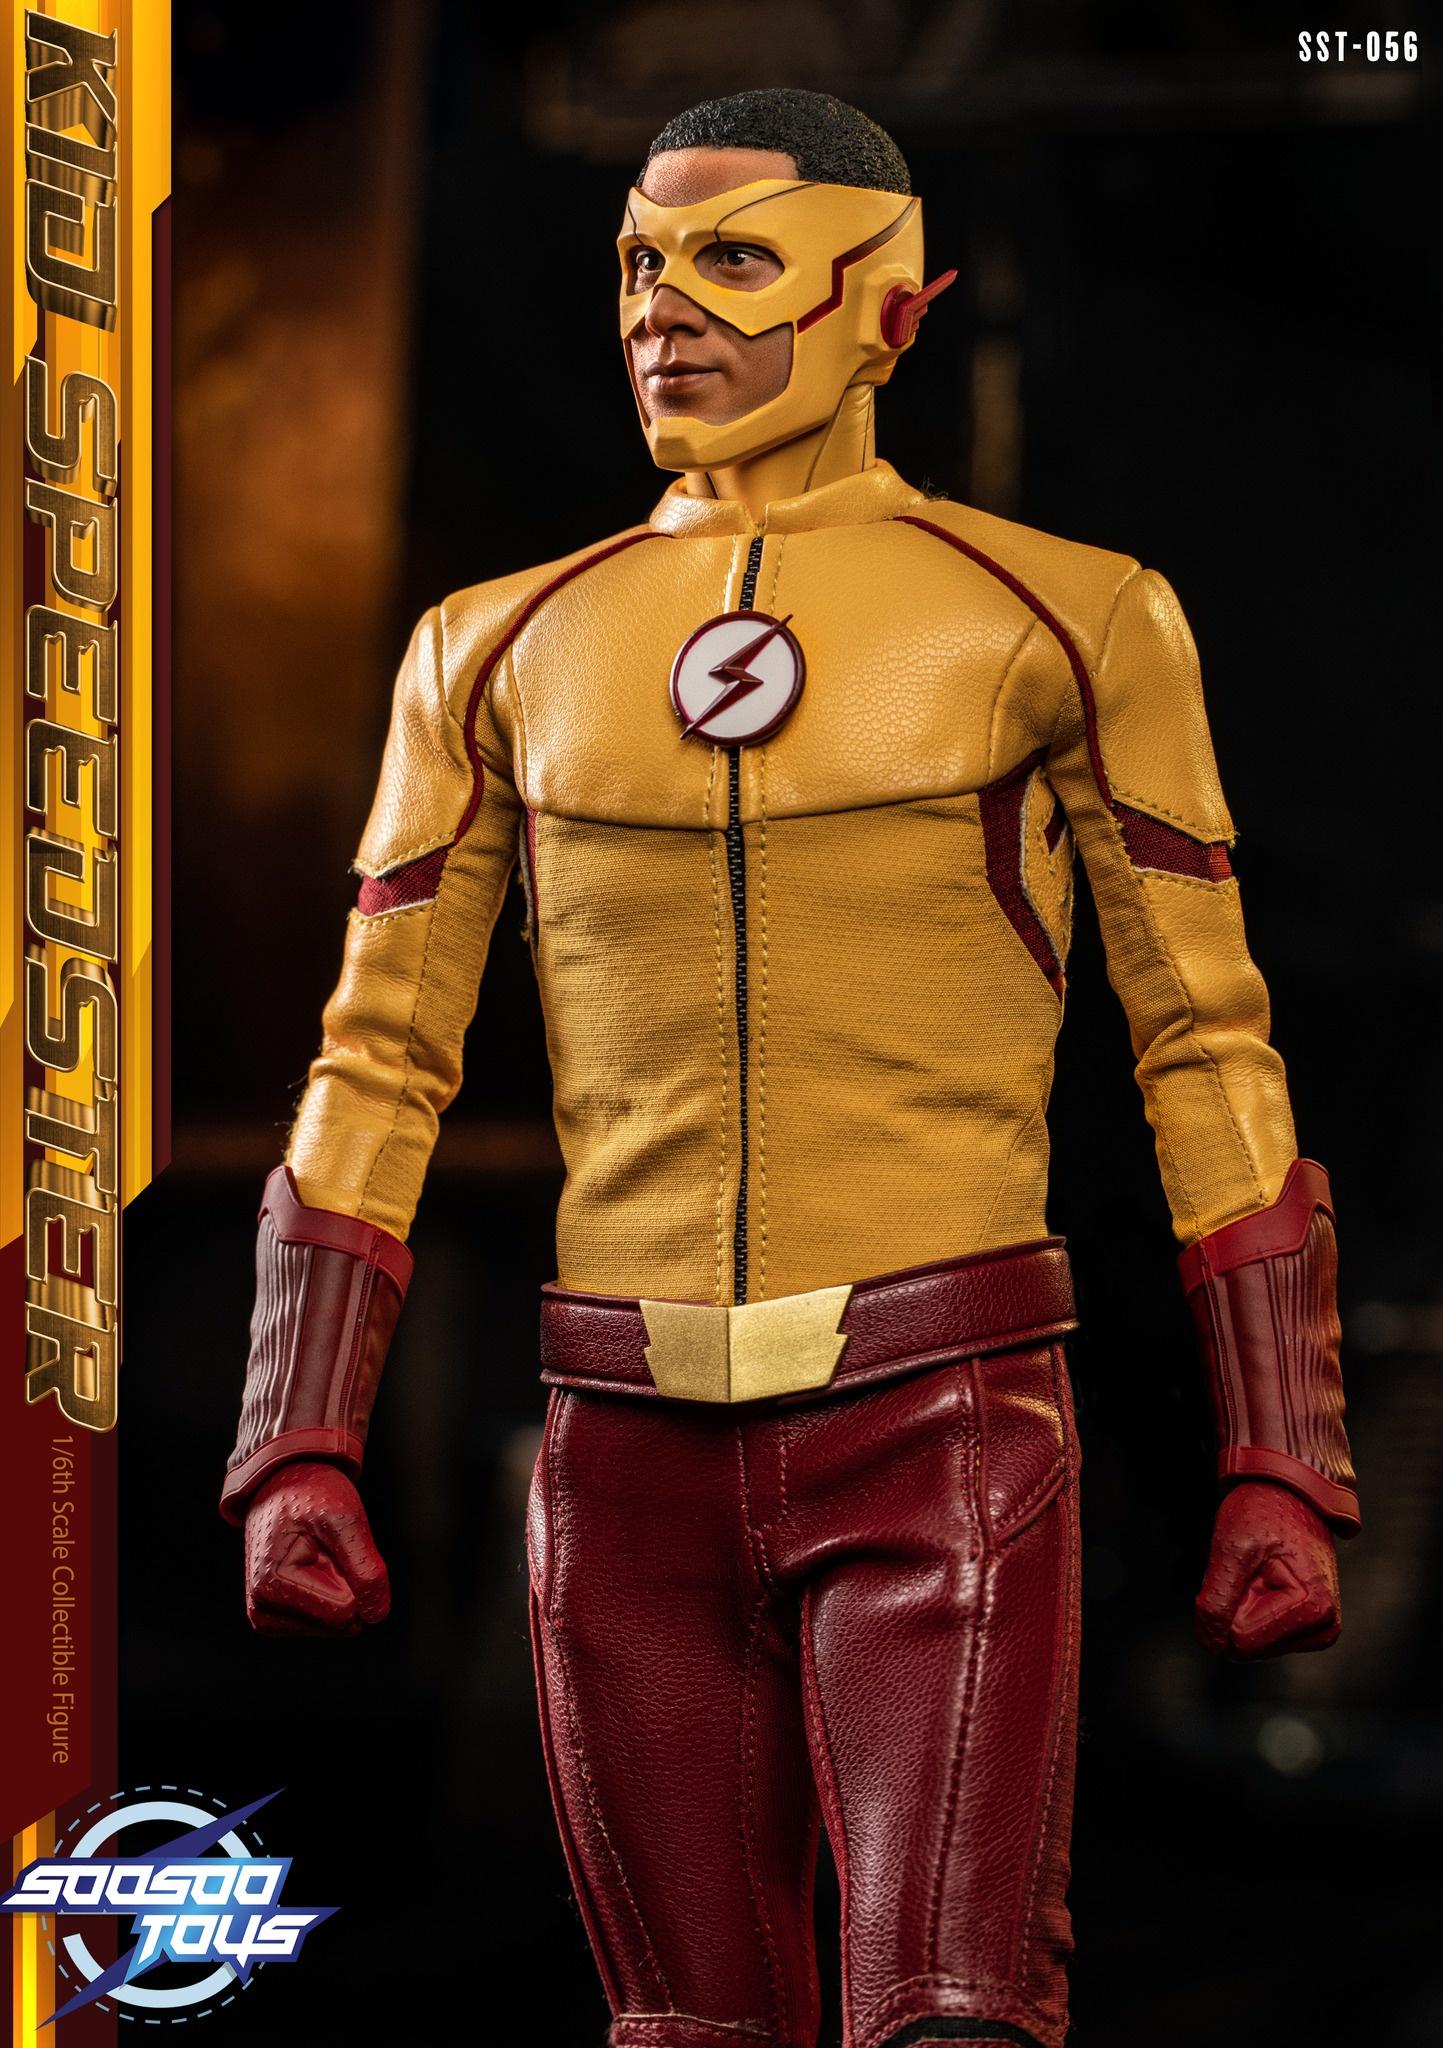 NEW PRODUCT: Soosootoys 1/6 scale collectible SST-056: The Kid Speedster F79394ceb02fa4af0eb4b420fc58b0b9